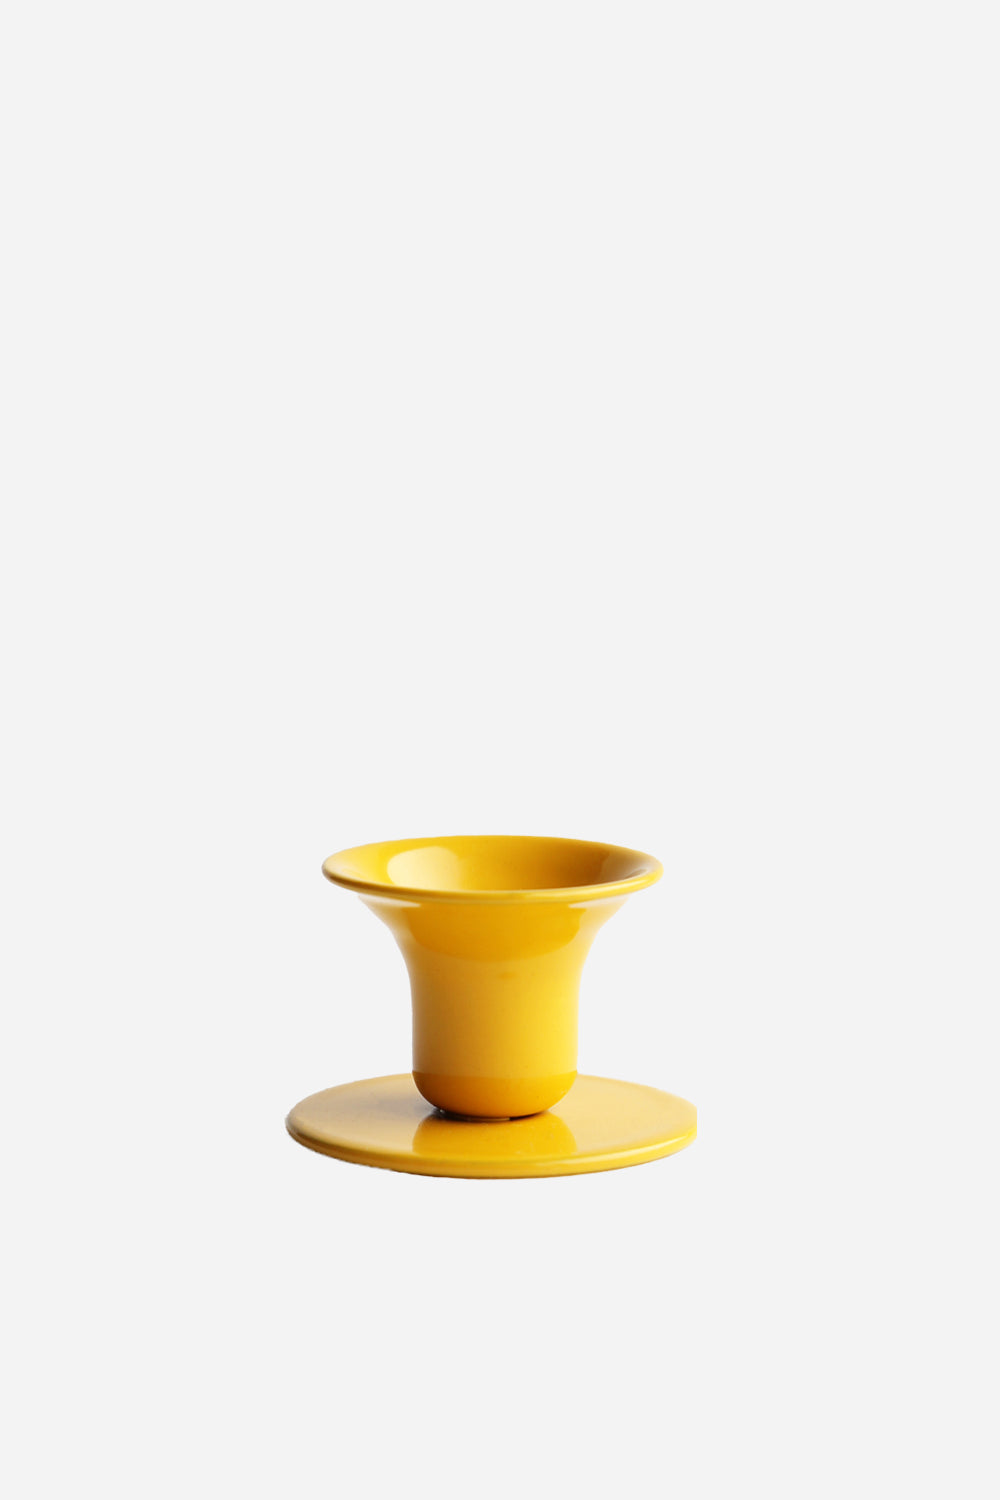 The Bell Candlestick / Yellow